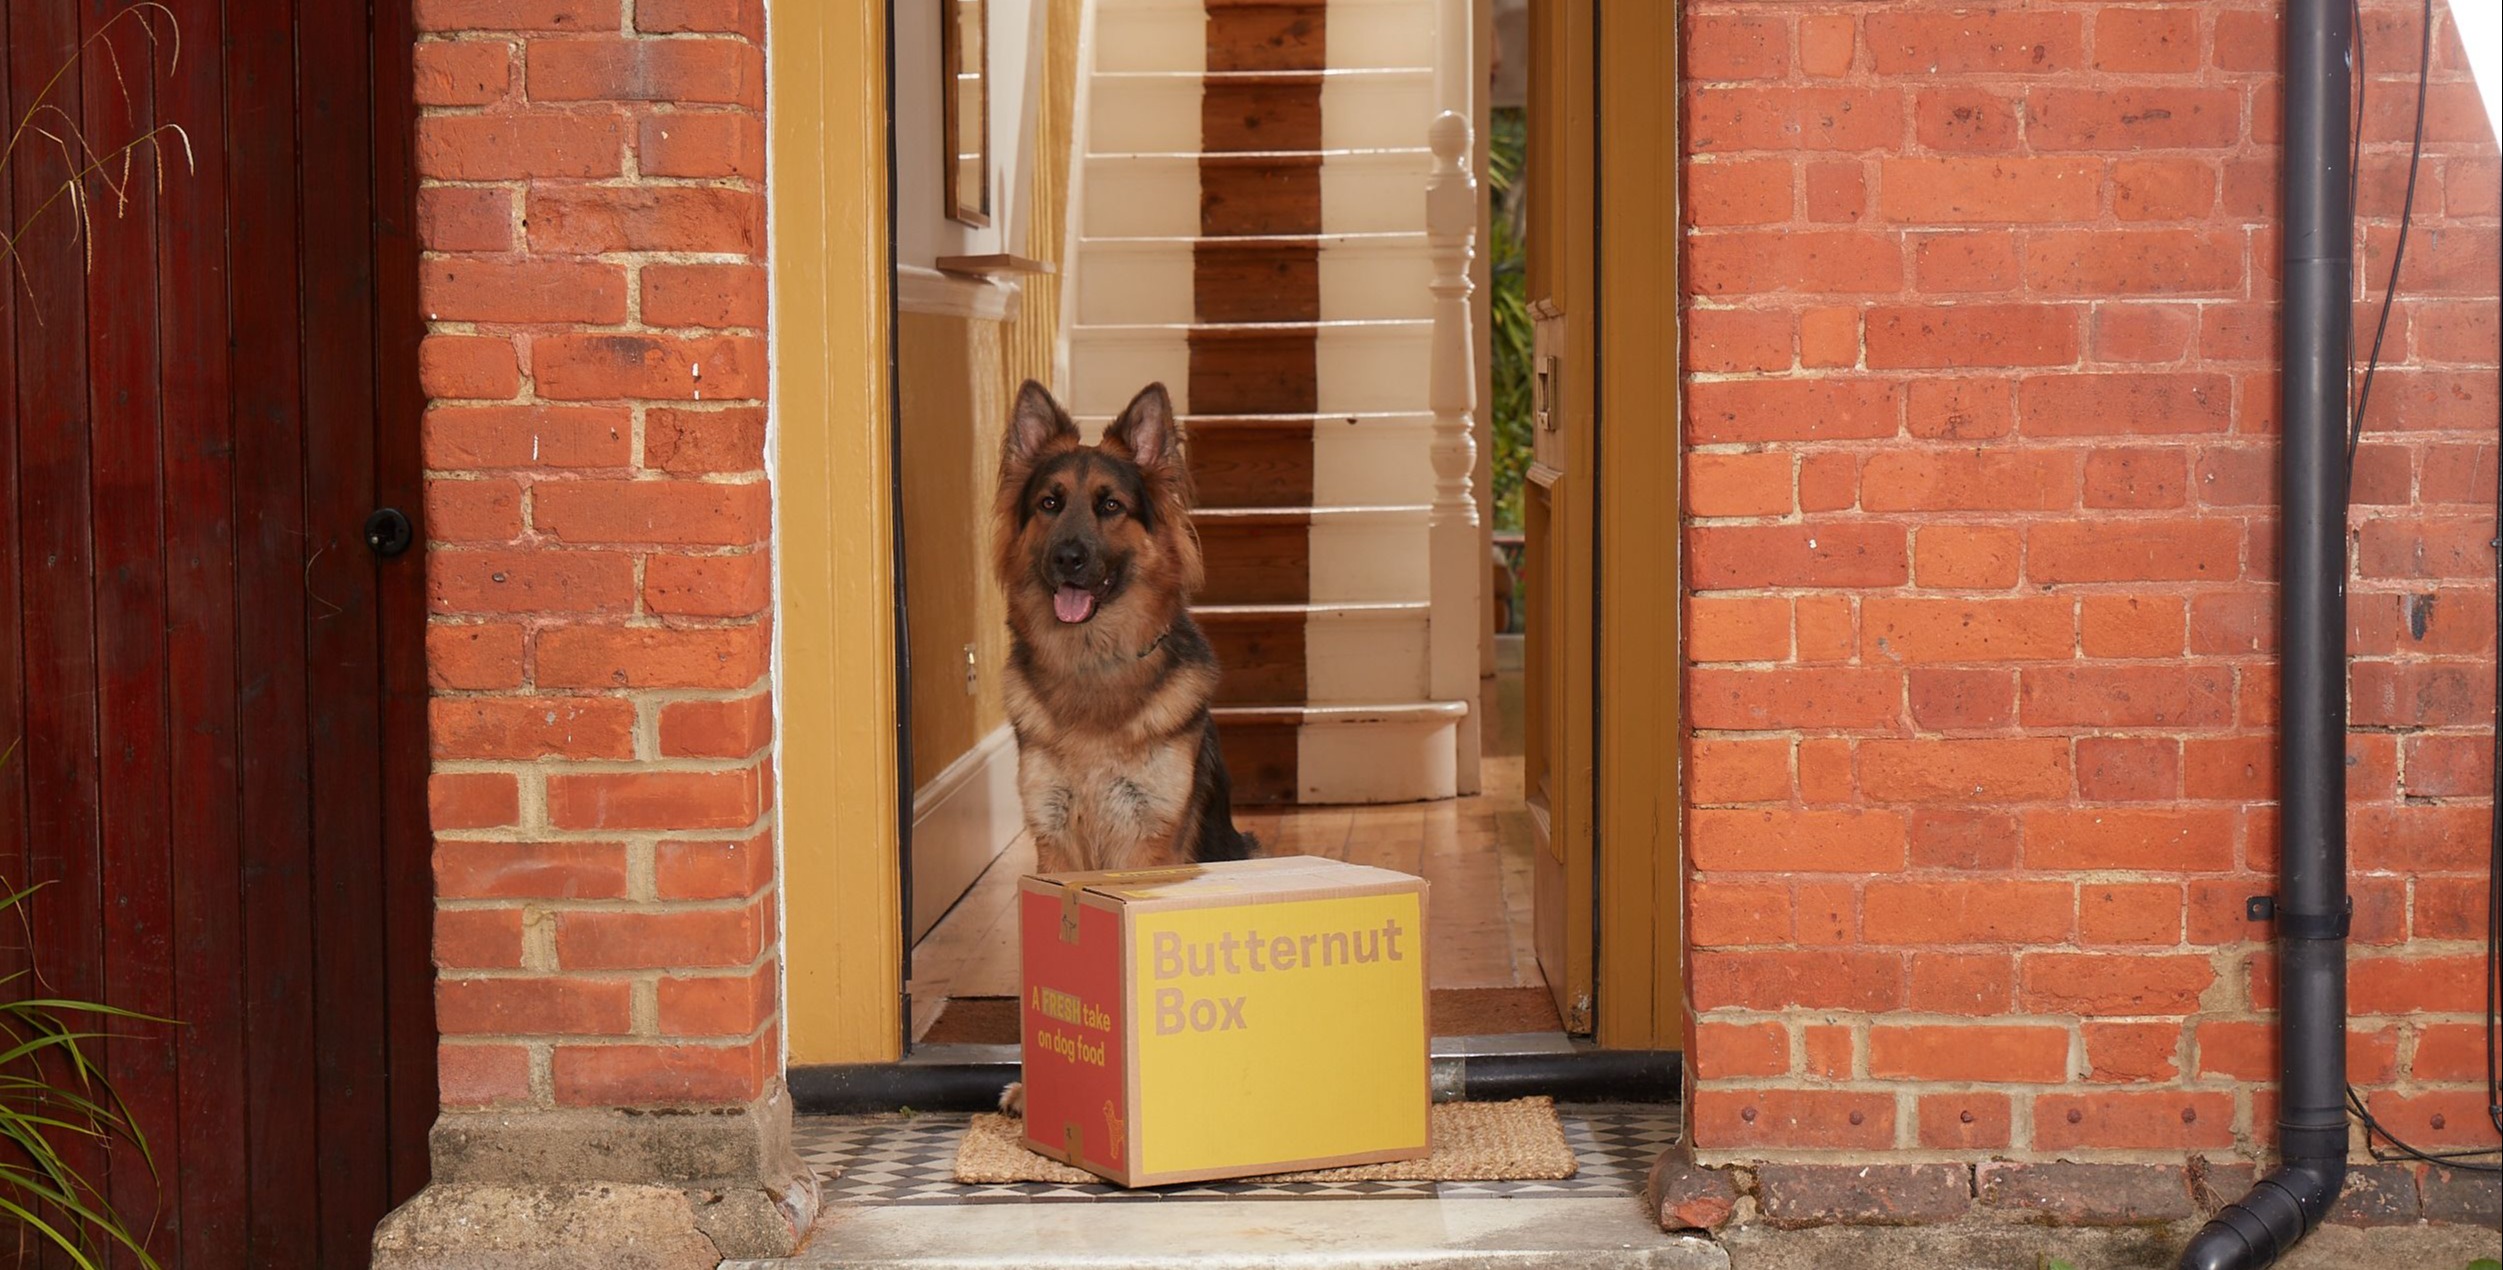 Dog and box delivery day